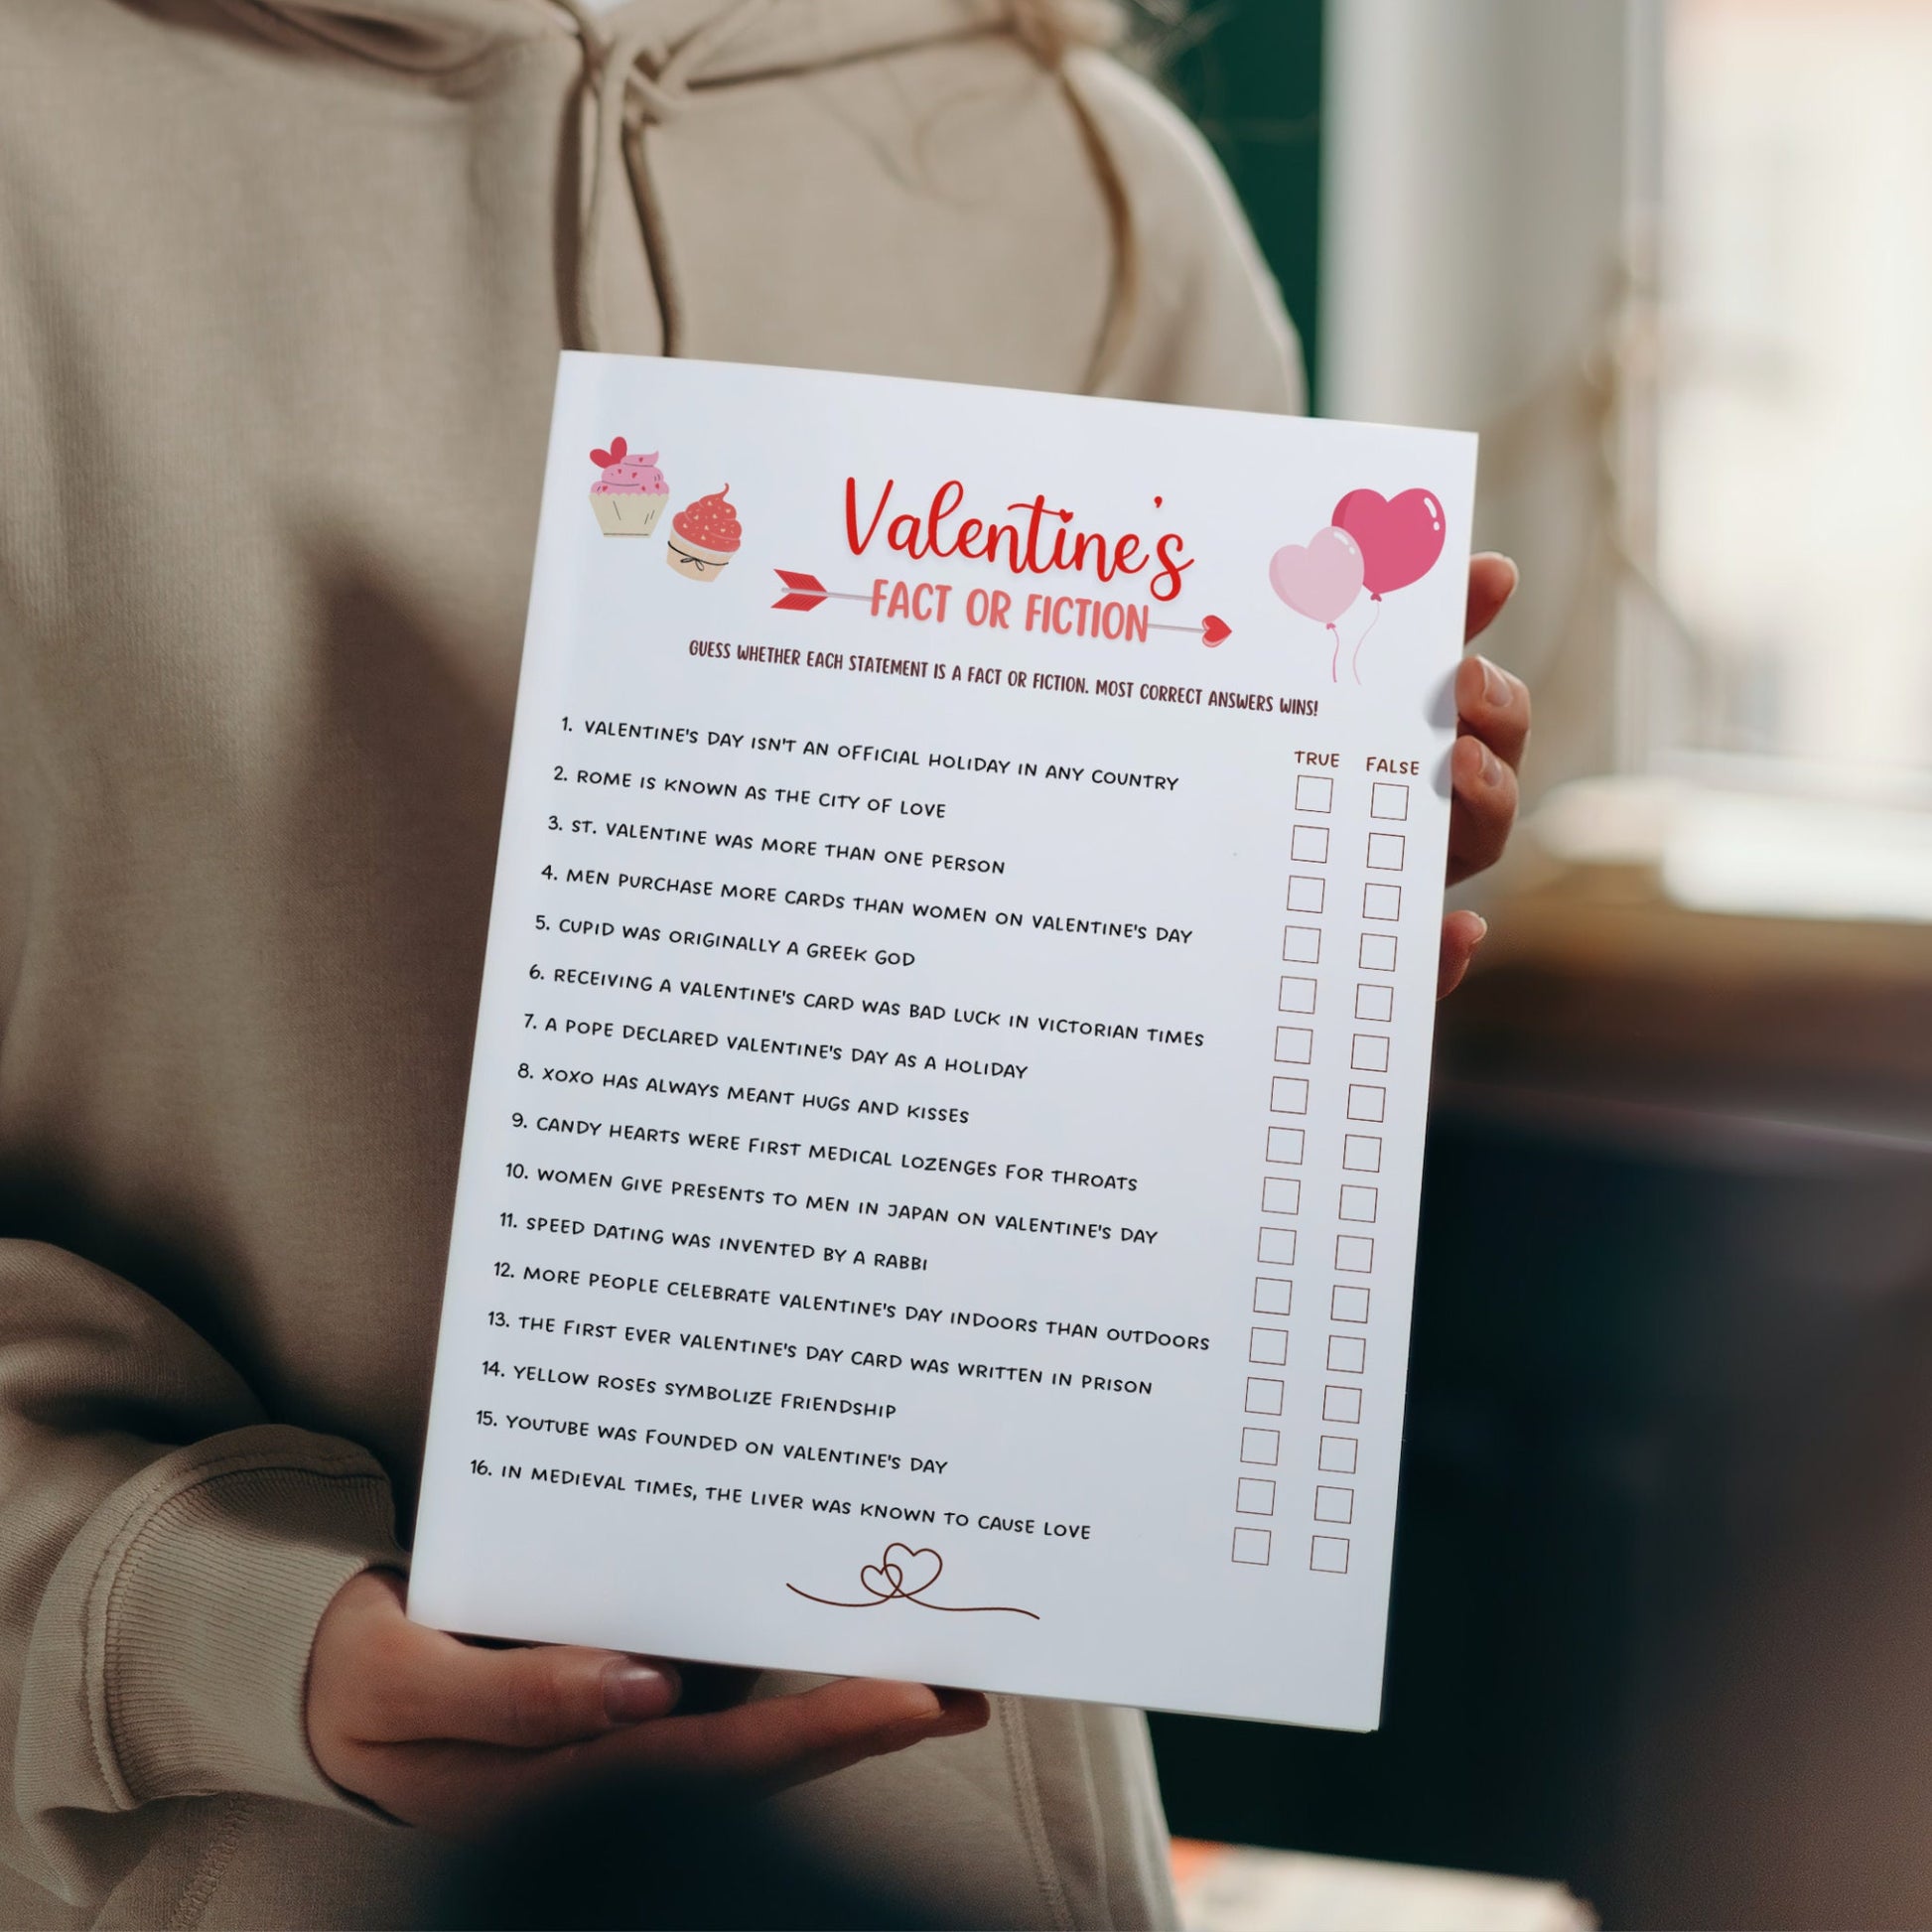 Valentine's Day Games Bundle Printable For Adults, Galentines Day Games, Valentine Office Party Games, Valentines Activity, Fun Family Games